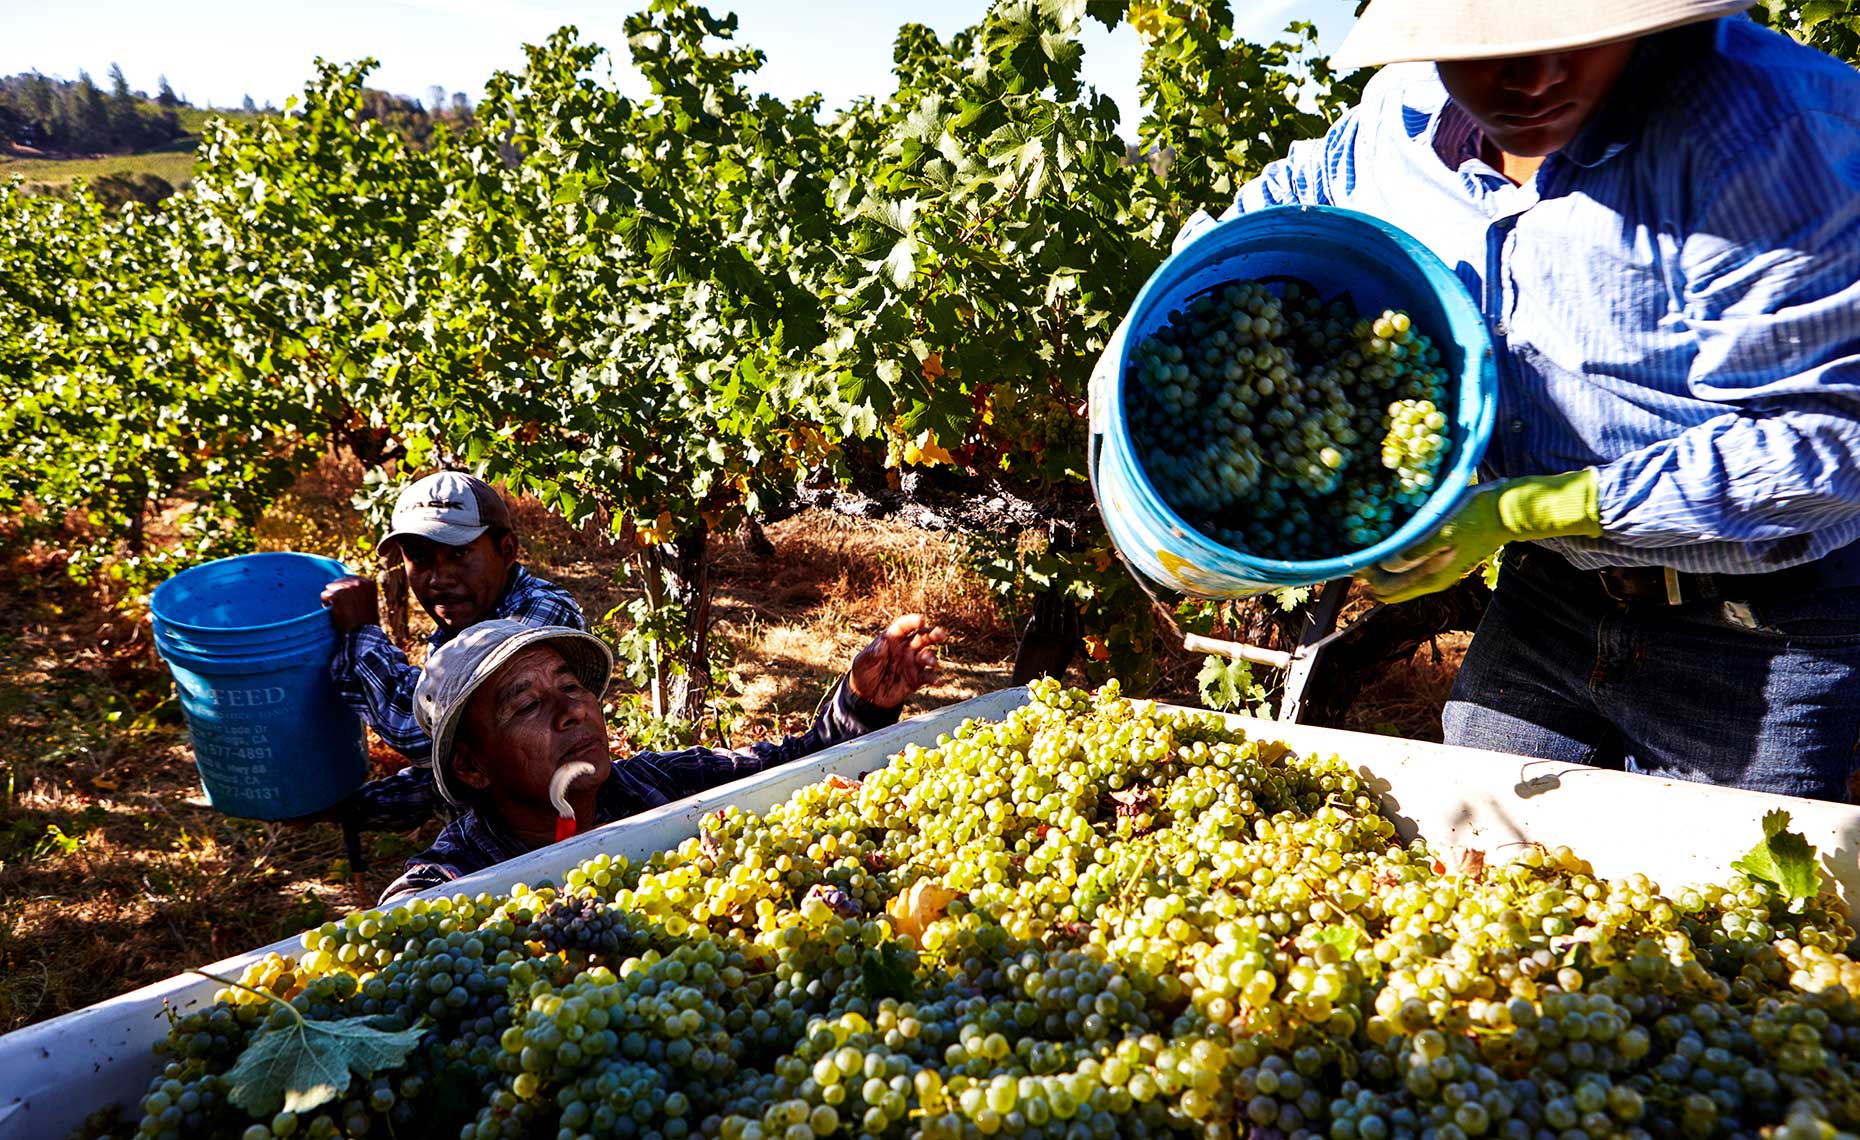 Putting harvested grapes into large bins